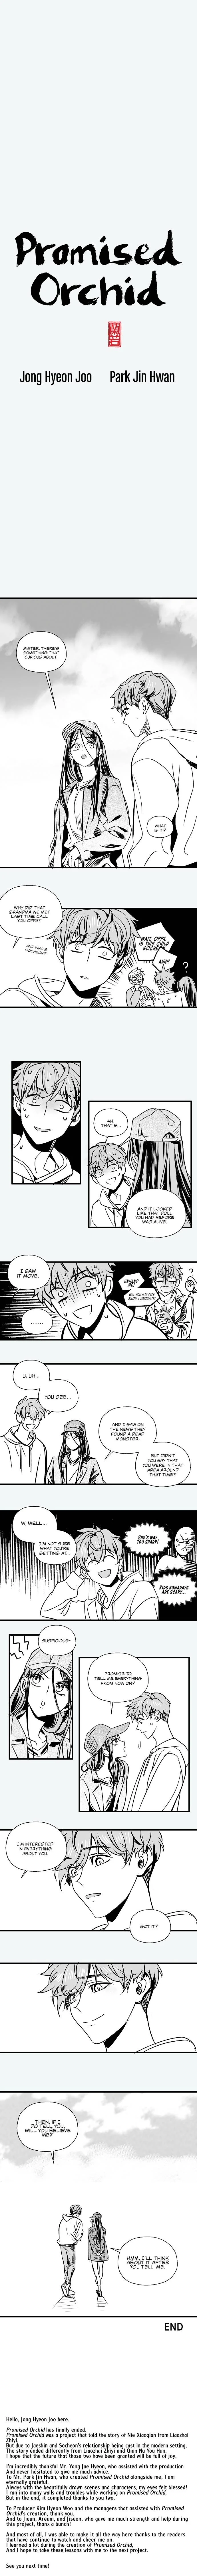 Promised Orchid - Chapter 53 - Mangatx